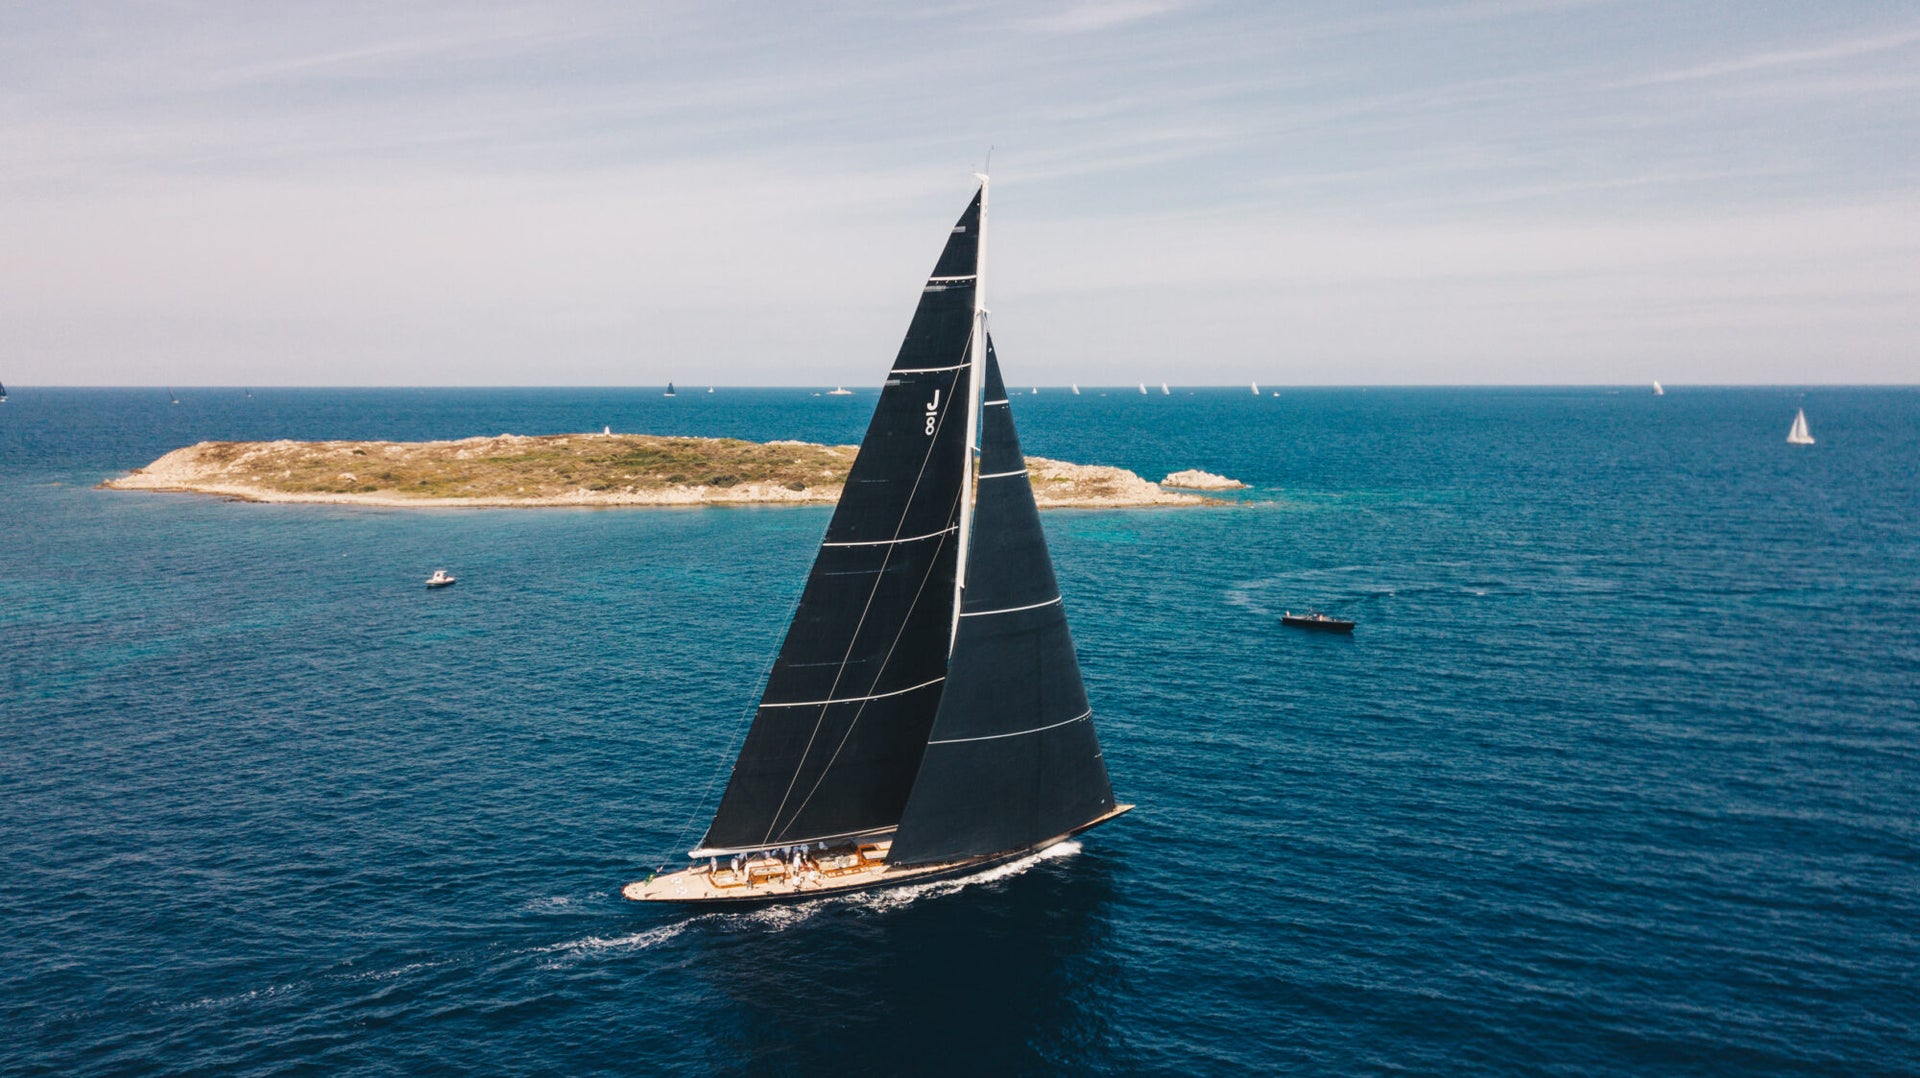 RESULTS SPEAK FOR THEMSELVES AT THE 2021 MAXI YACHT ROLEX CUP